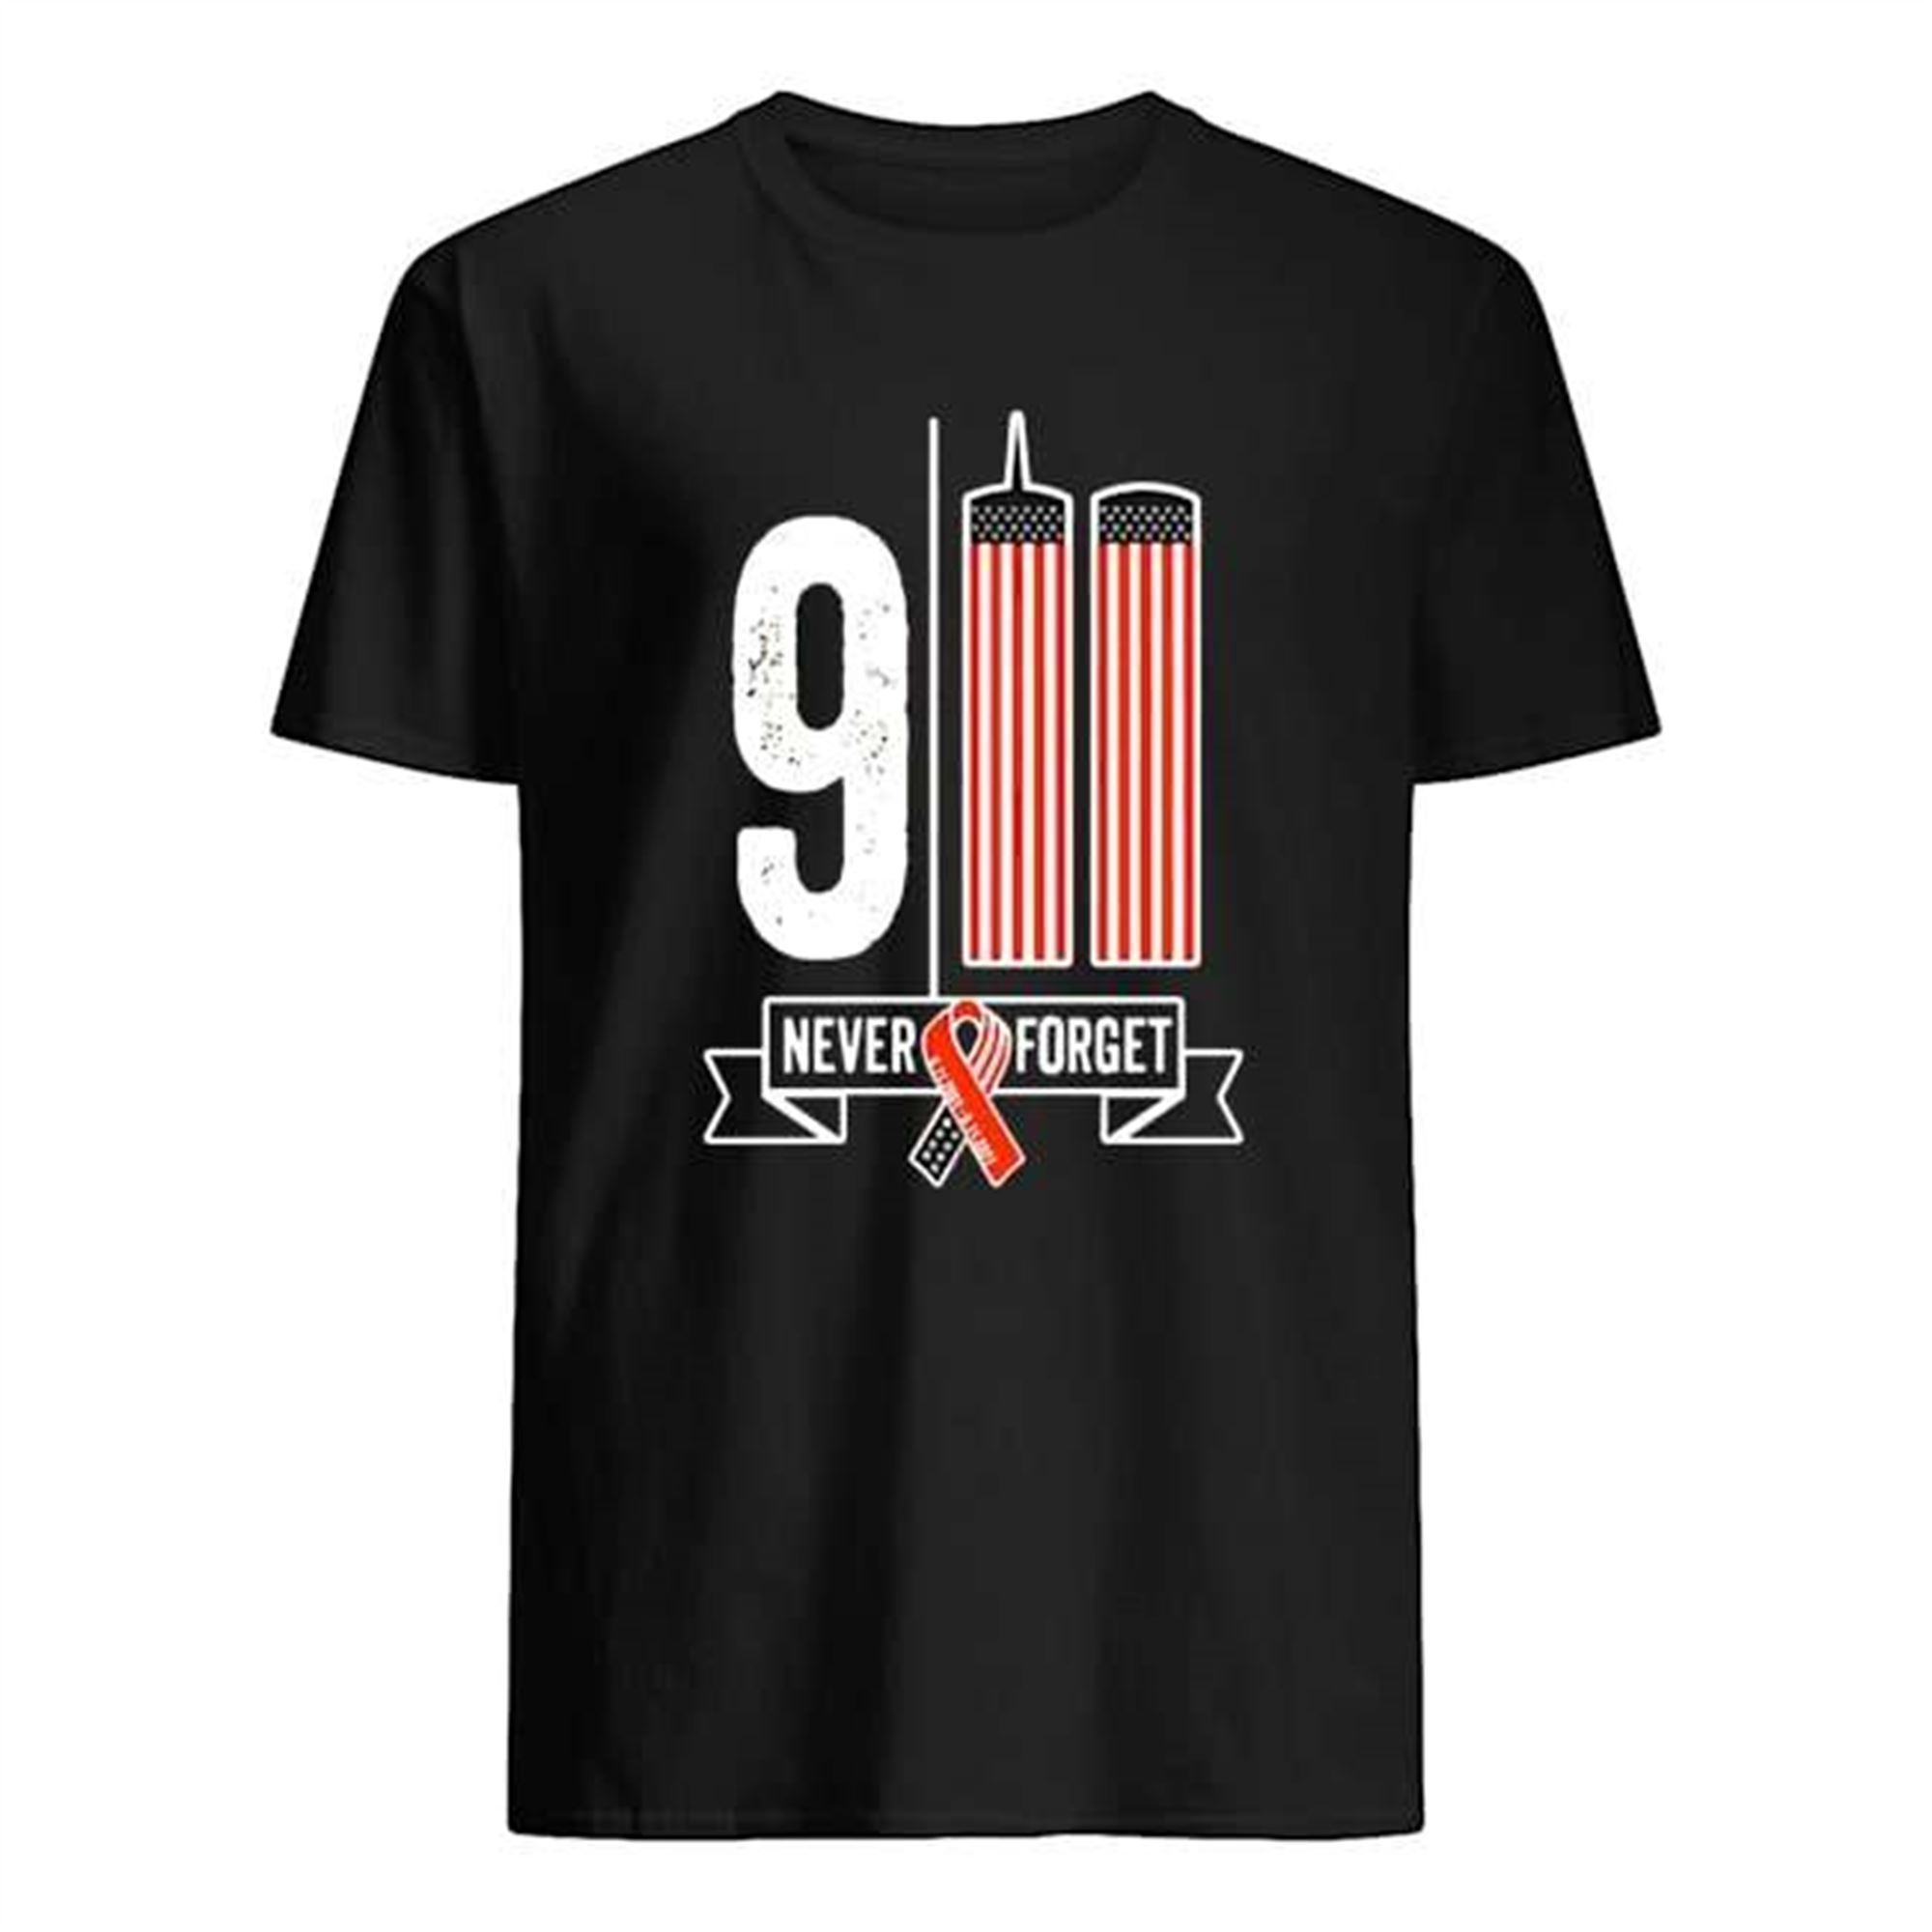 20th Anniversary 9-11 Shirt Hoodie Sweater T-shirt Plus Size Up To 5xl